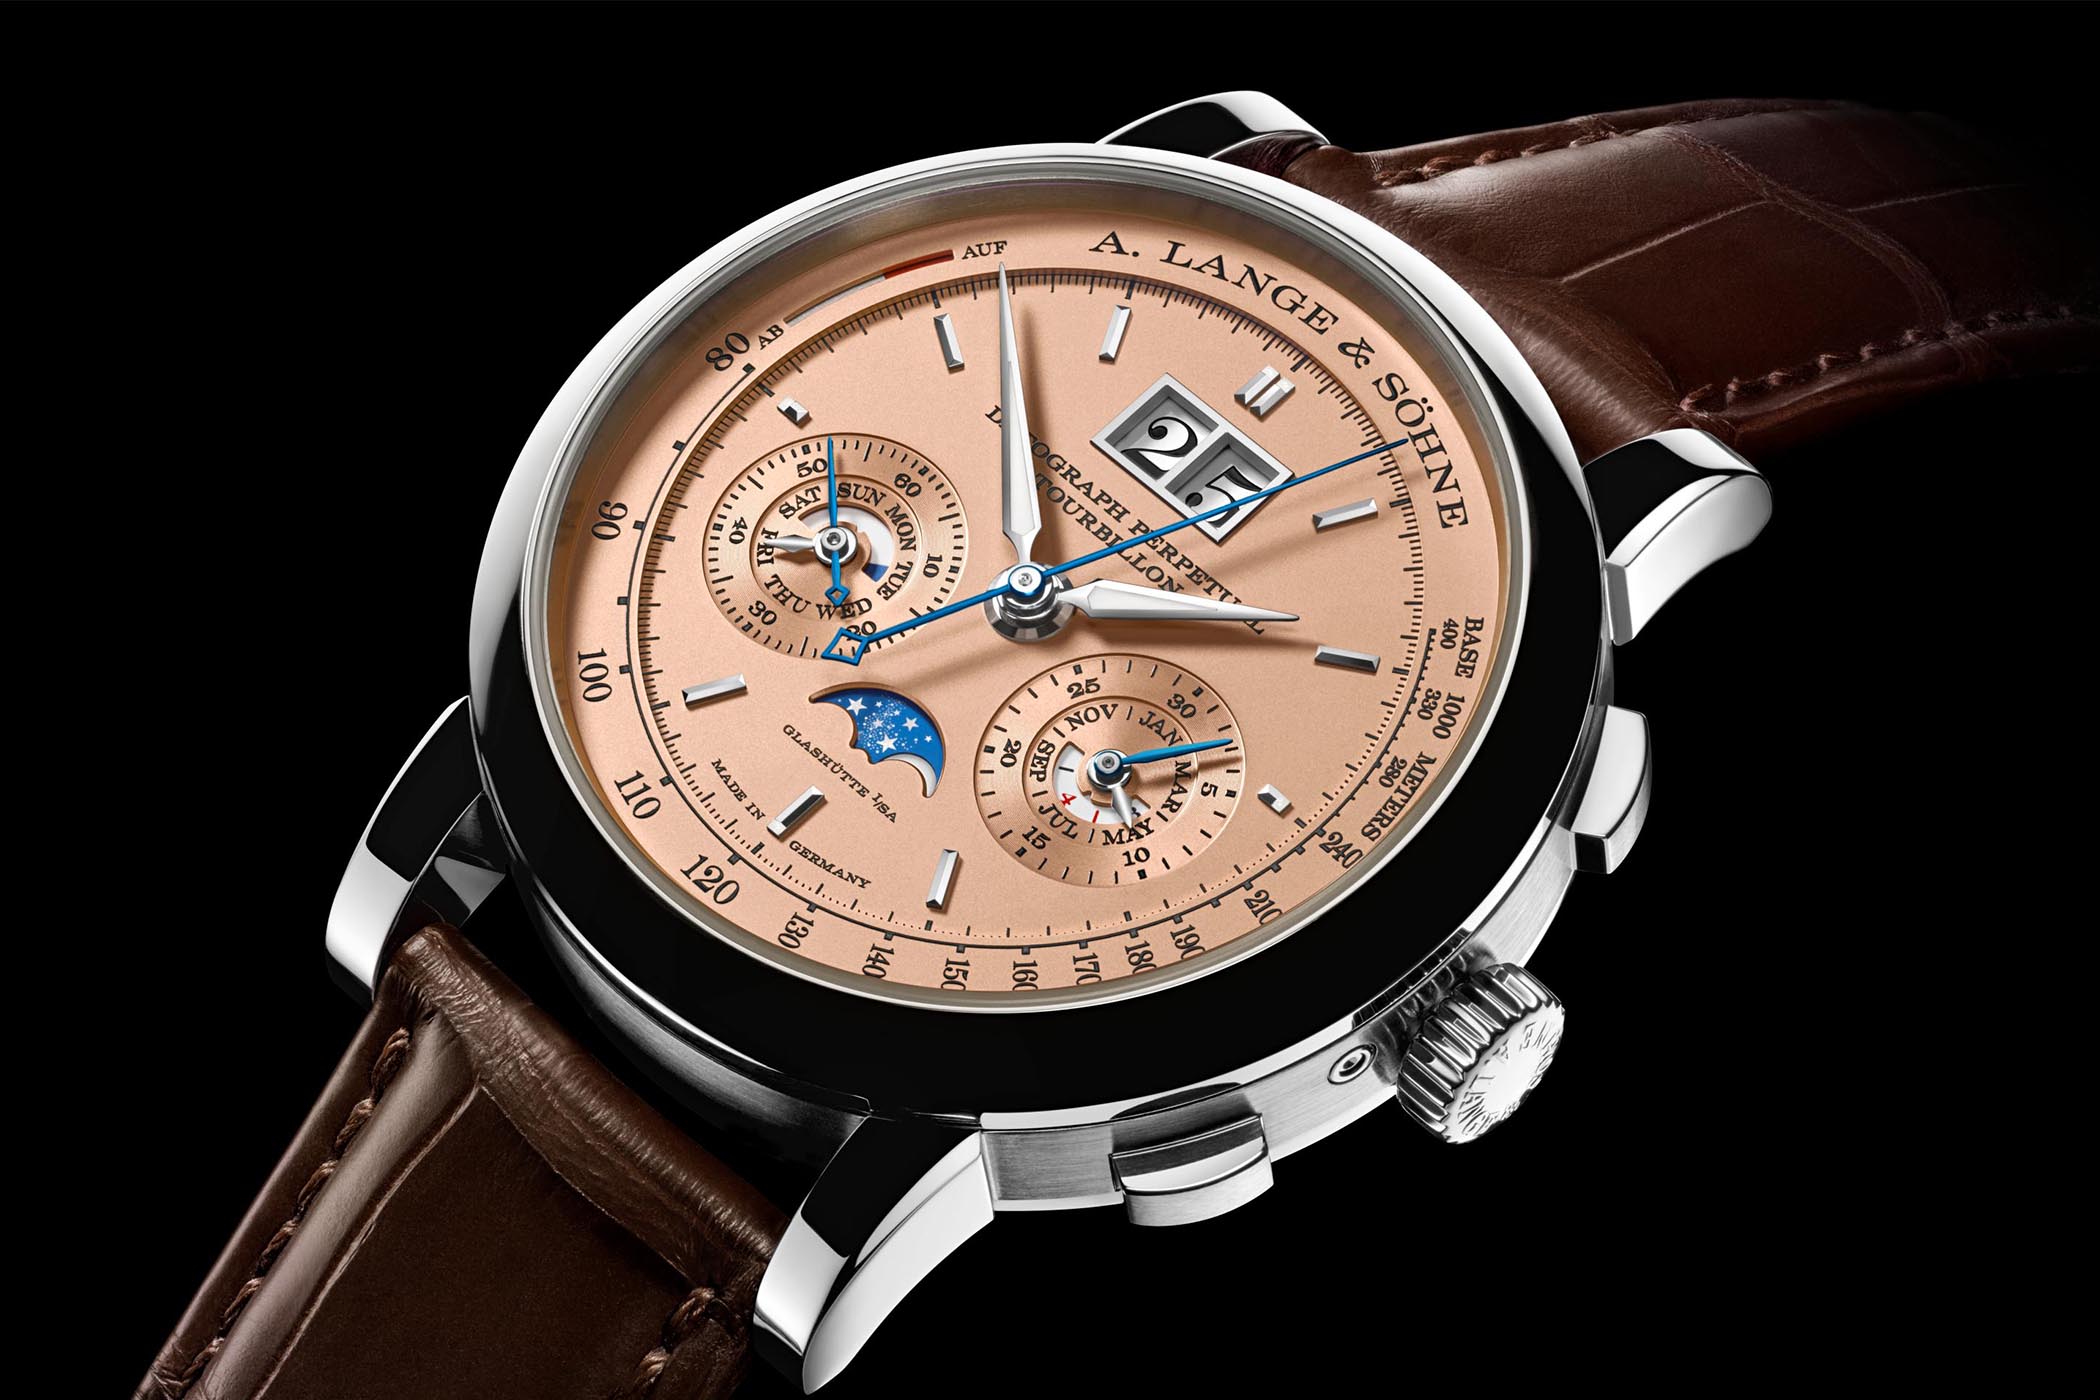 Does anyone have an A Lange & Sohne? - Page 1 - Watches - PistonHeads